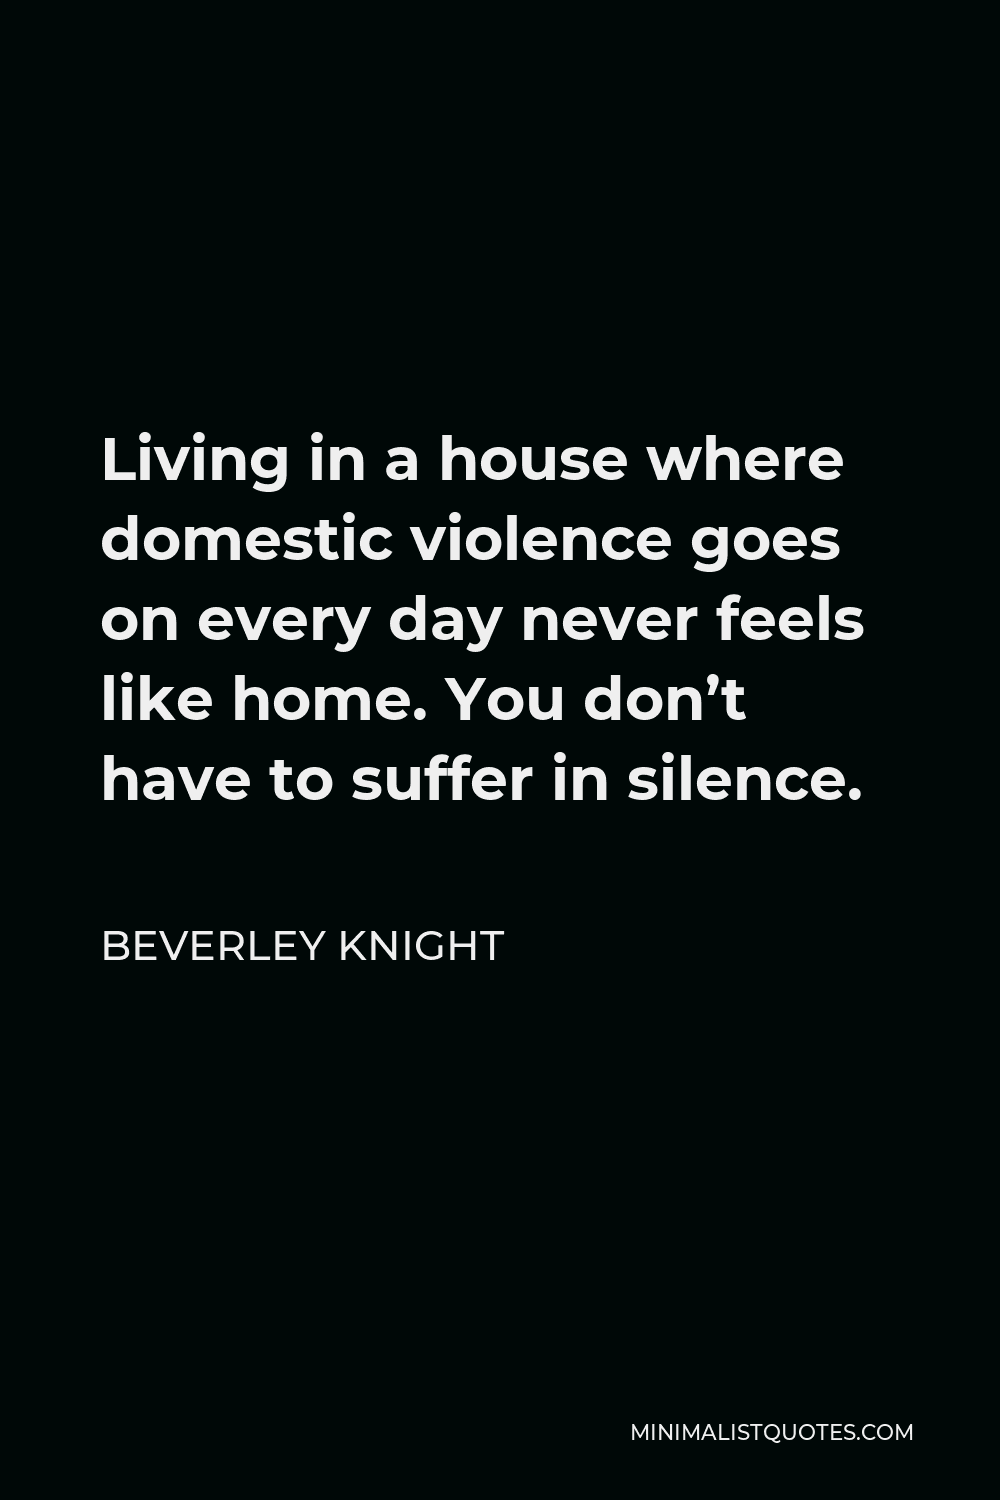 Beverley Knight Quote - Living in a house where domestic violence goes on every day never feels like home. You don’t have to suffer in silence.